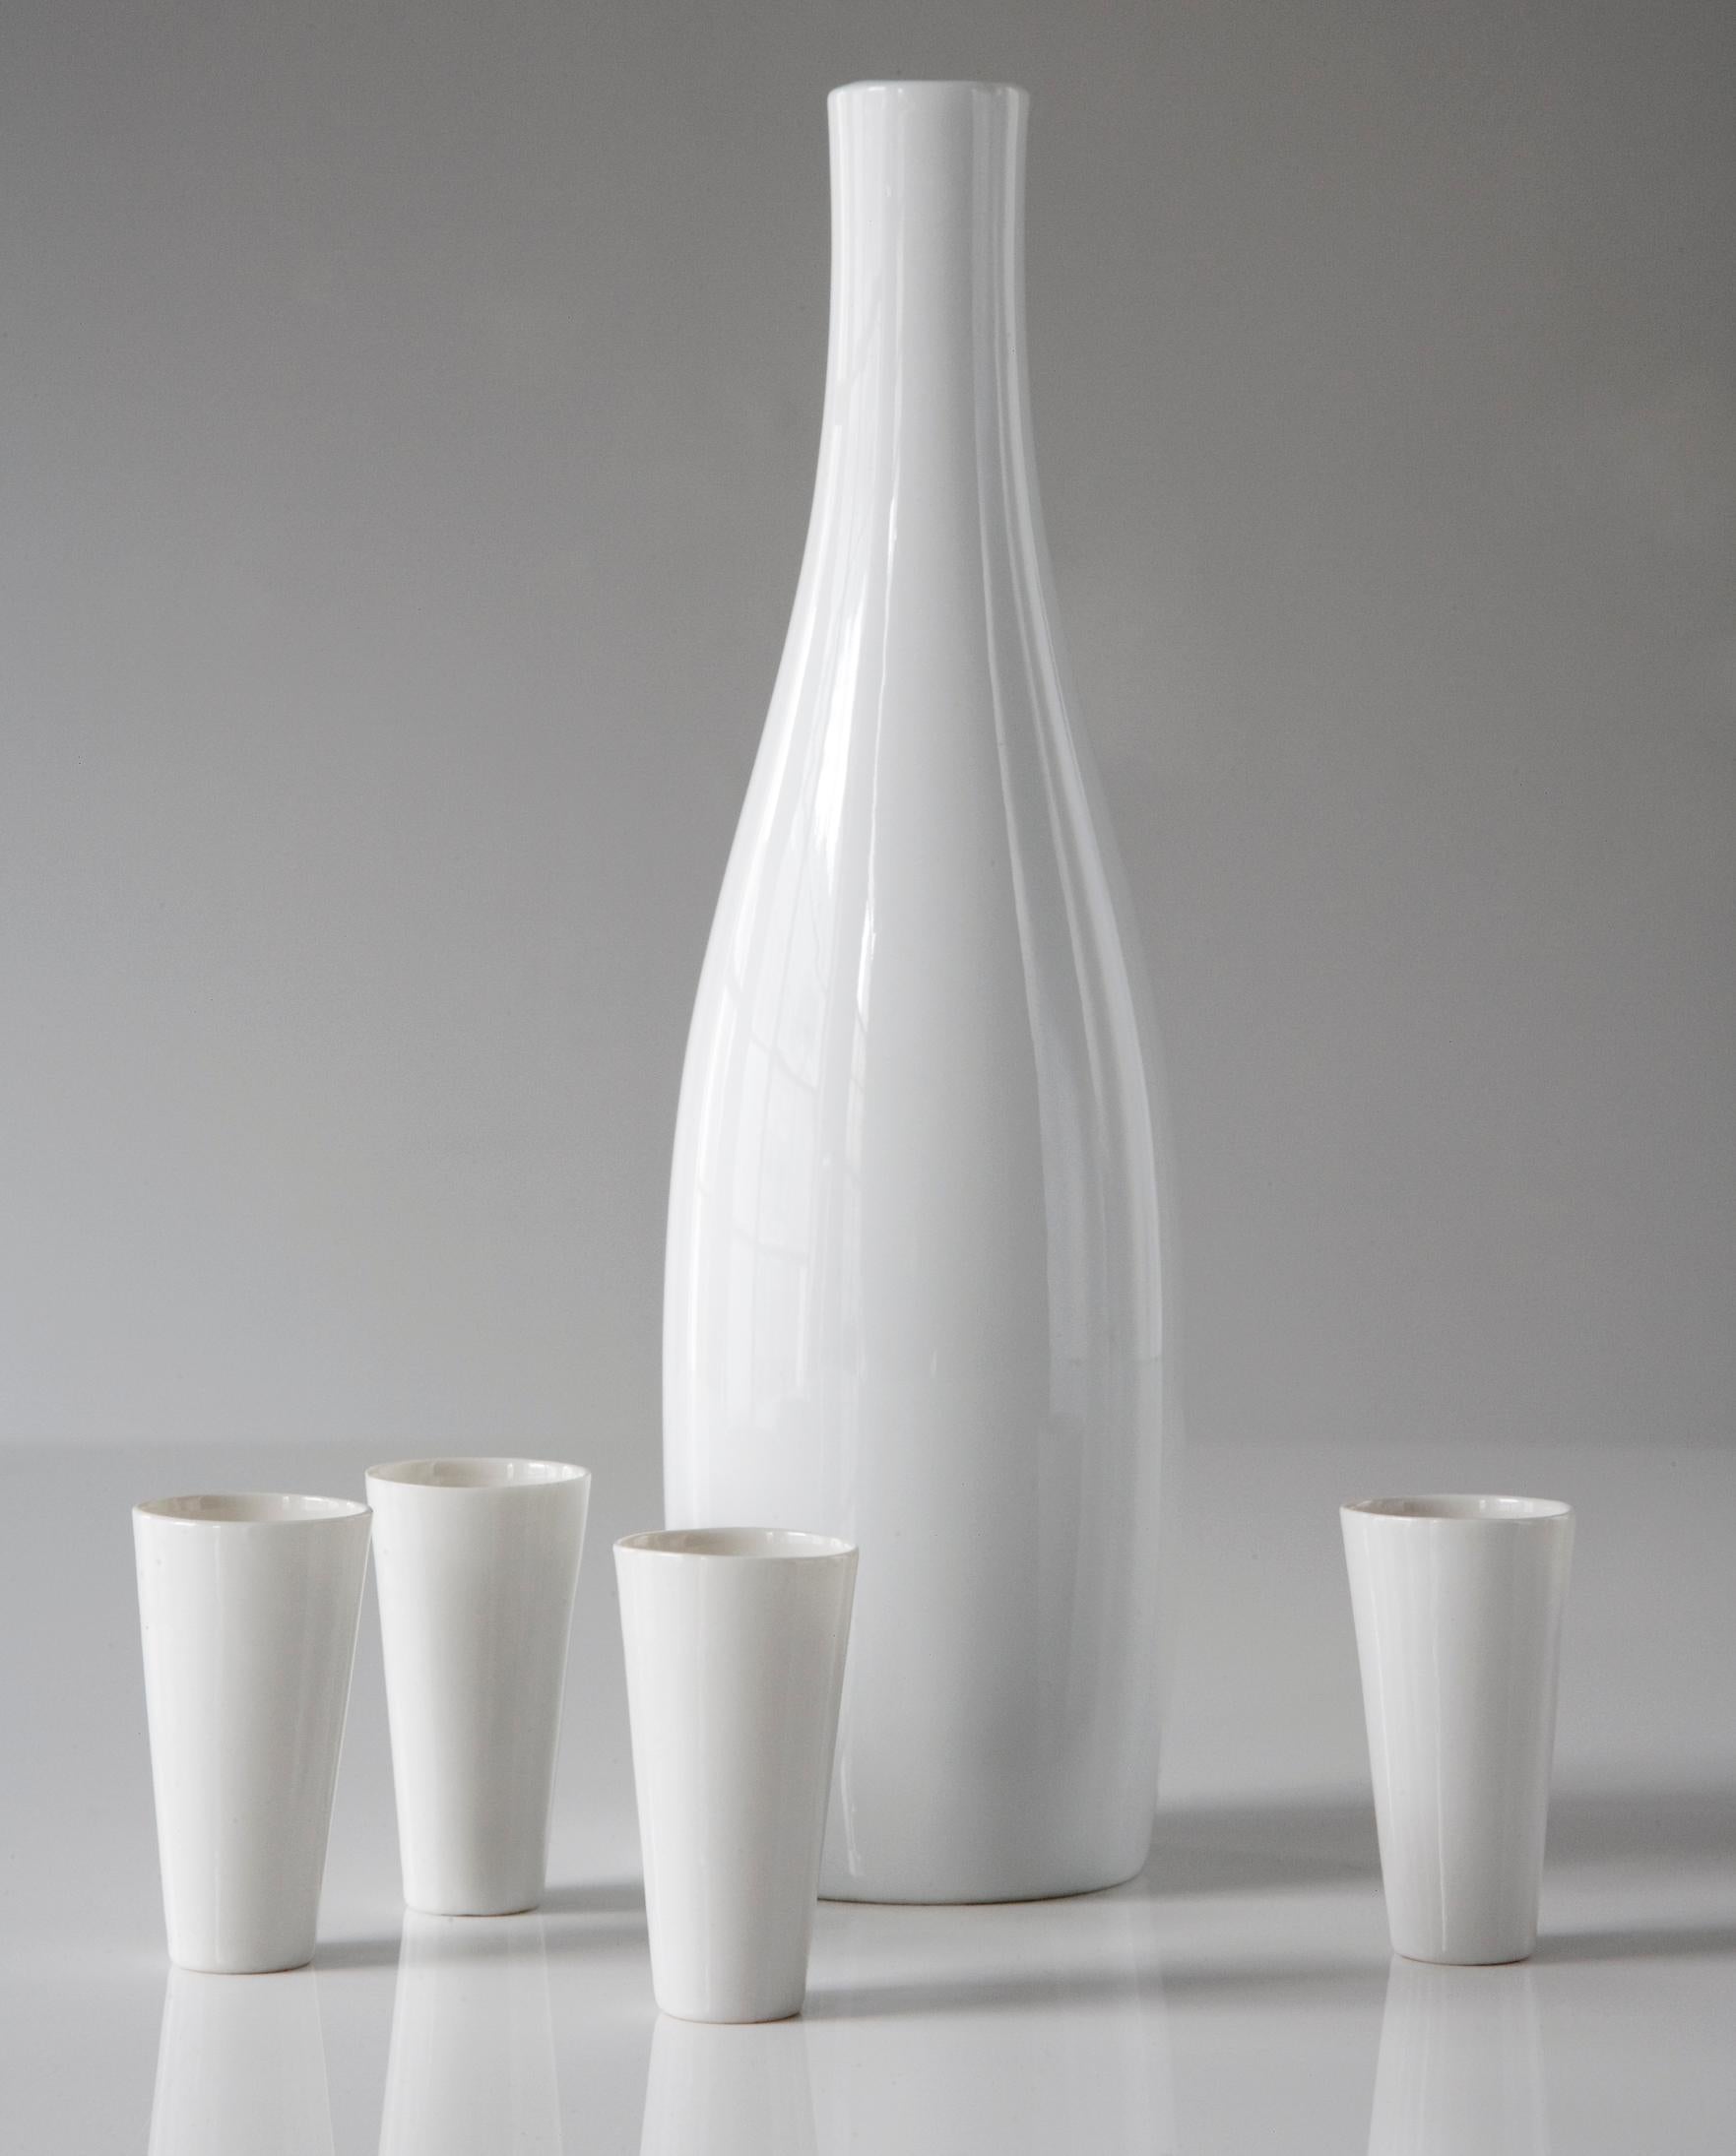 sake decanter and cups